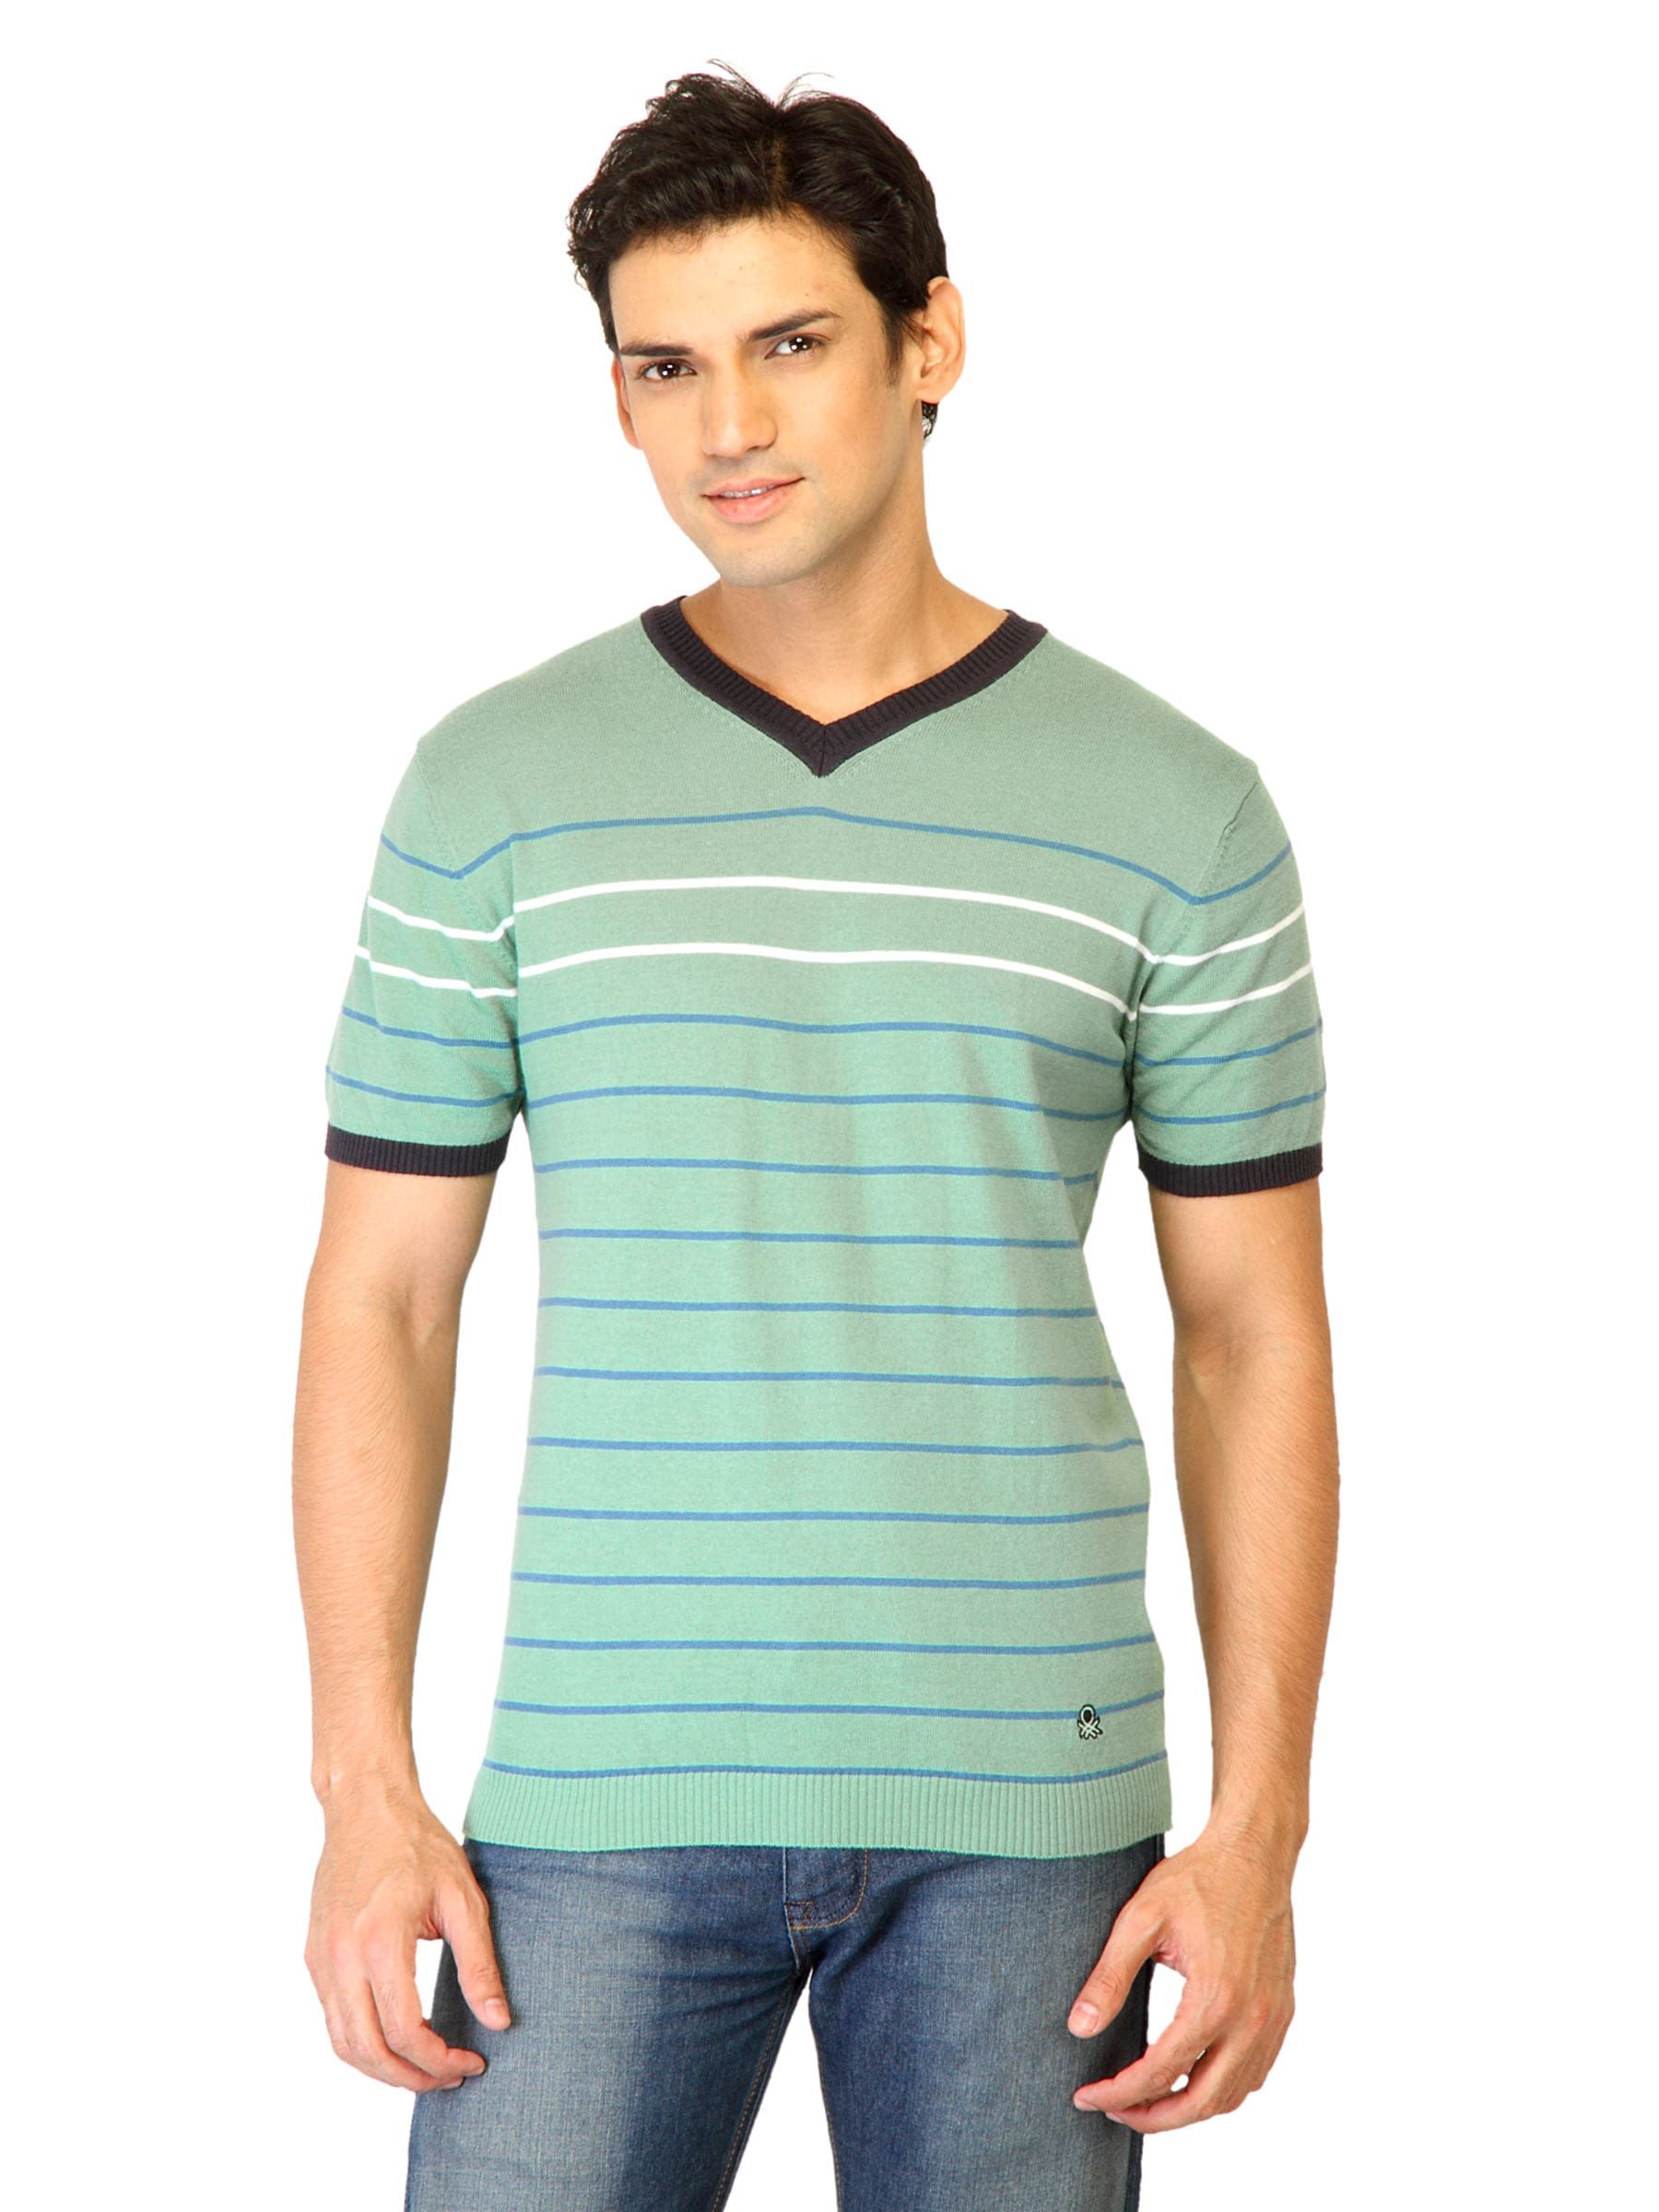 United Colors of Benetton Men Stripes Green Tshirts